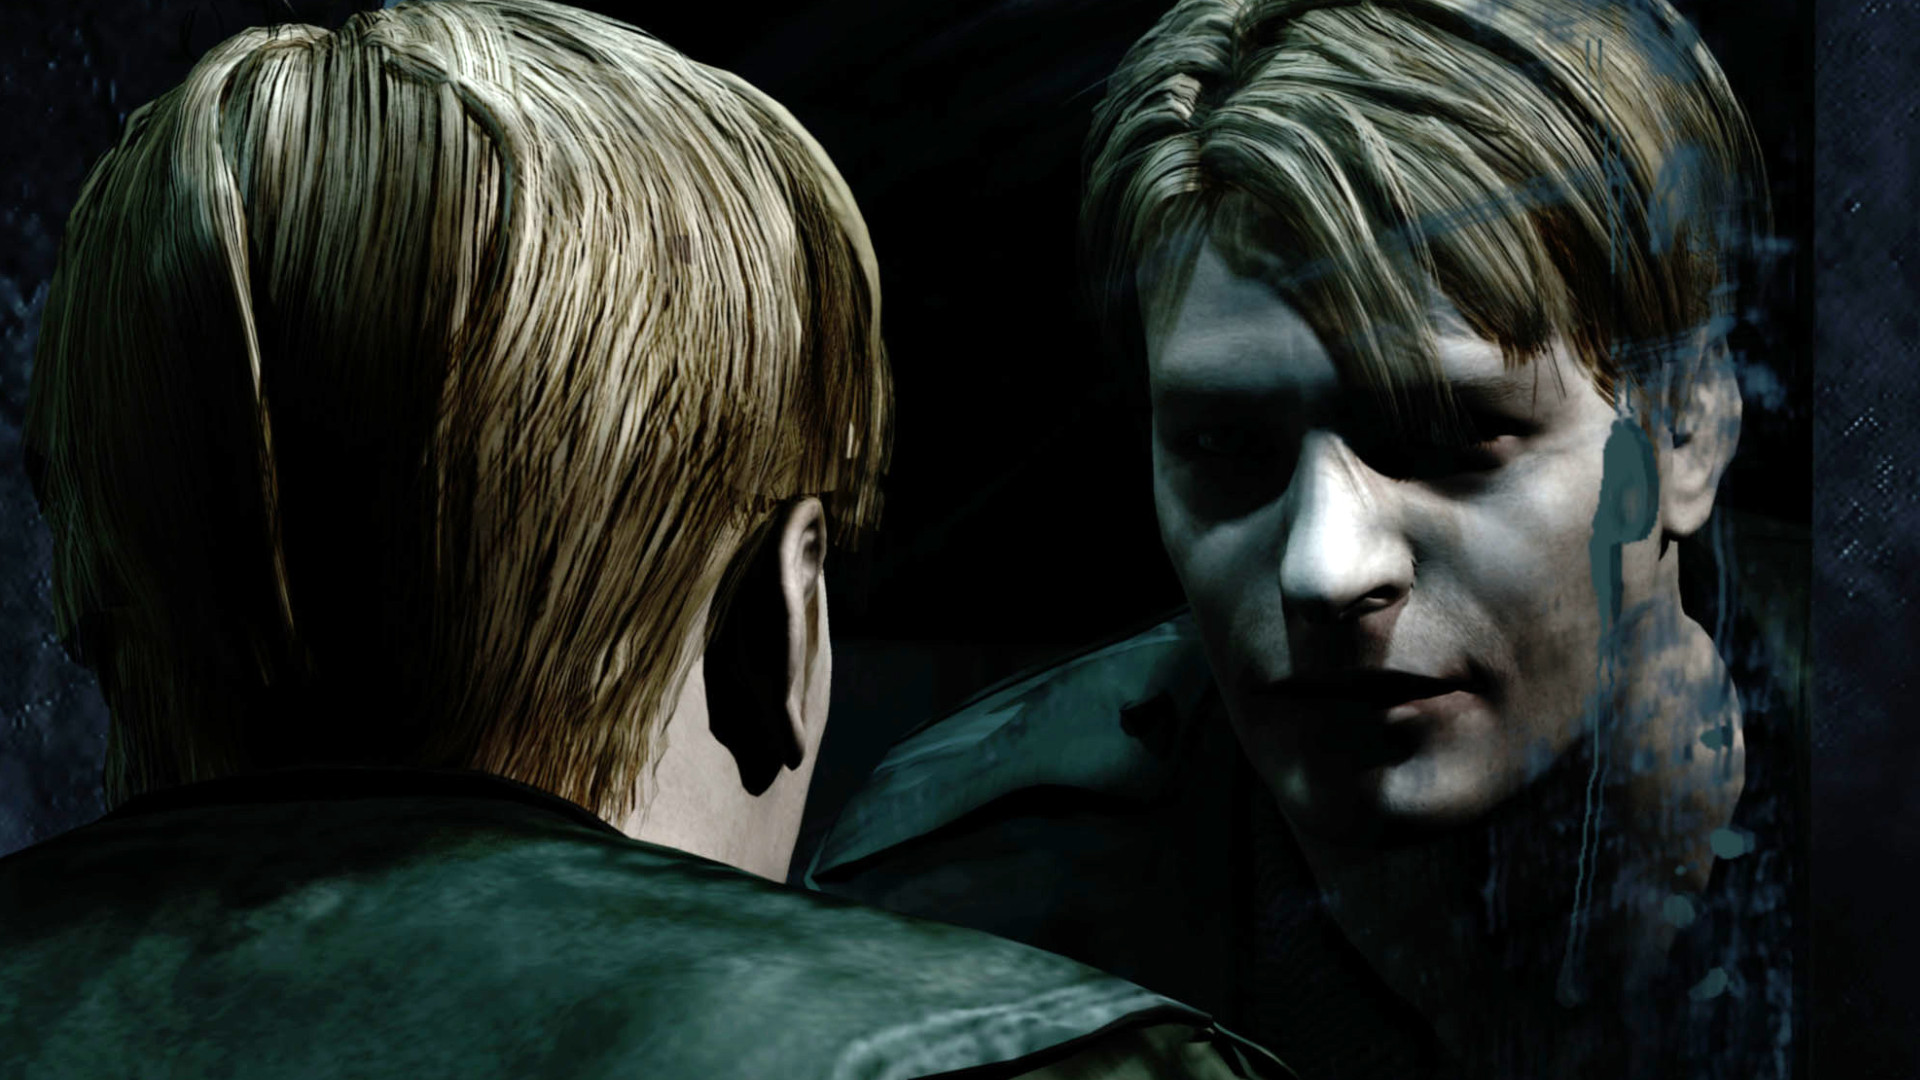 There are reportedly at least two separate Silent Hill games in development